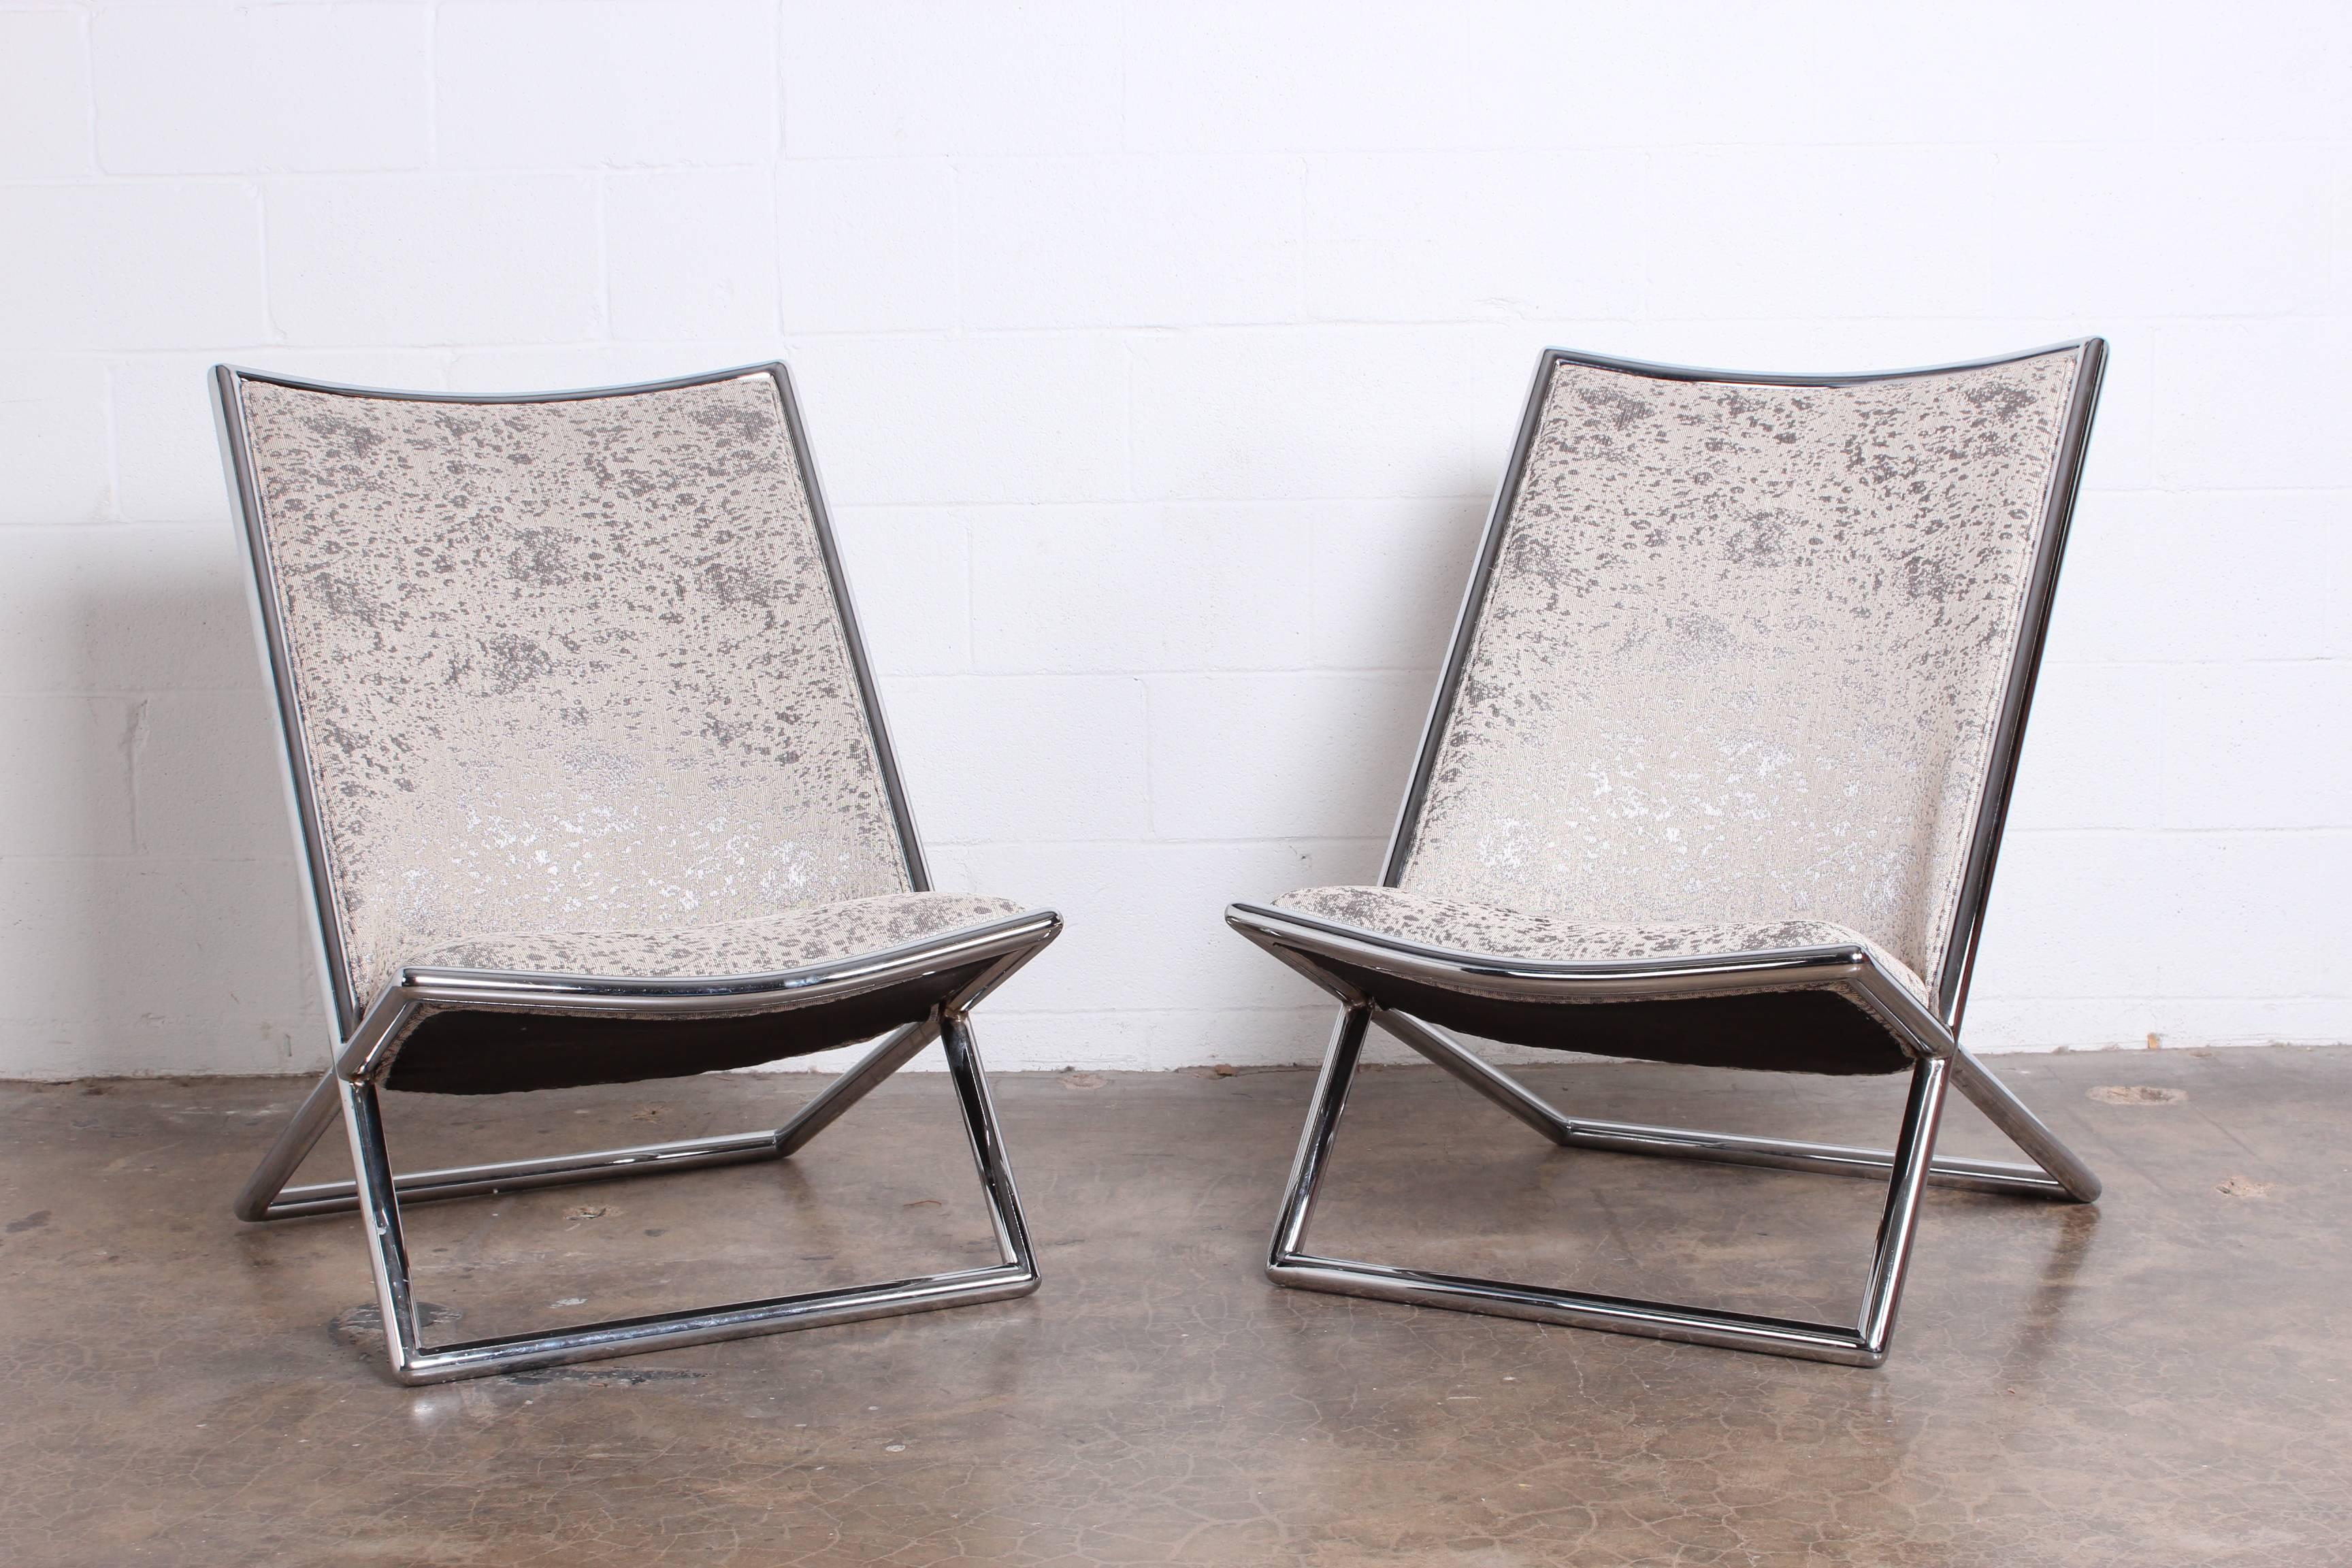 A pair of chrome scissor chairs designed by Ward Bennett for Brickel.